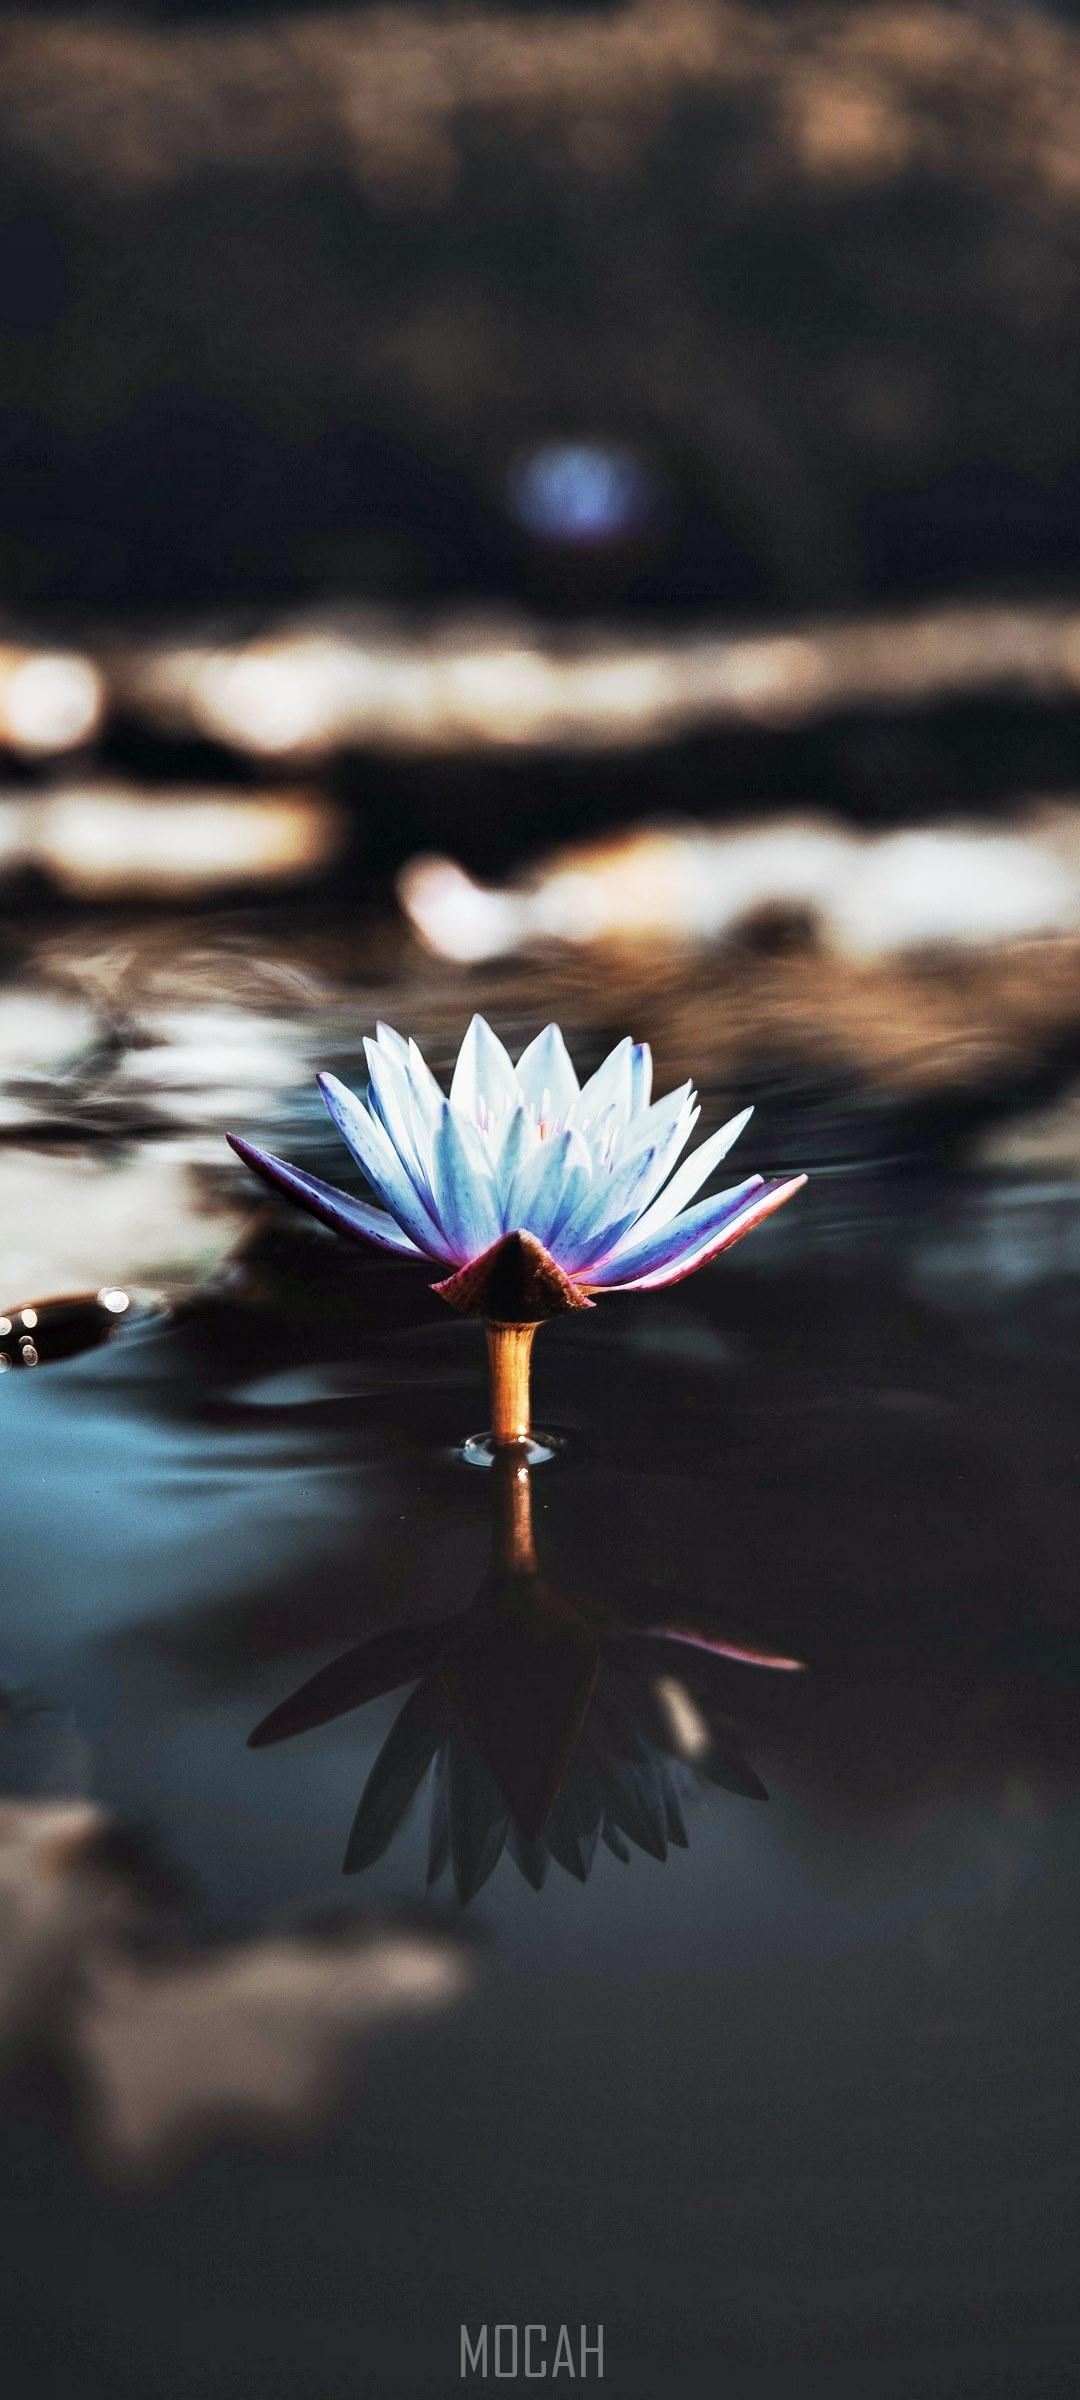 HD wallpaper, 1080X2400, Oppo Reno3 Vitality Background Hd, Scared To Be Lonely, A Light Violet Water Lily Jutting Out From The Surface Of Water